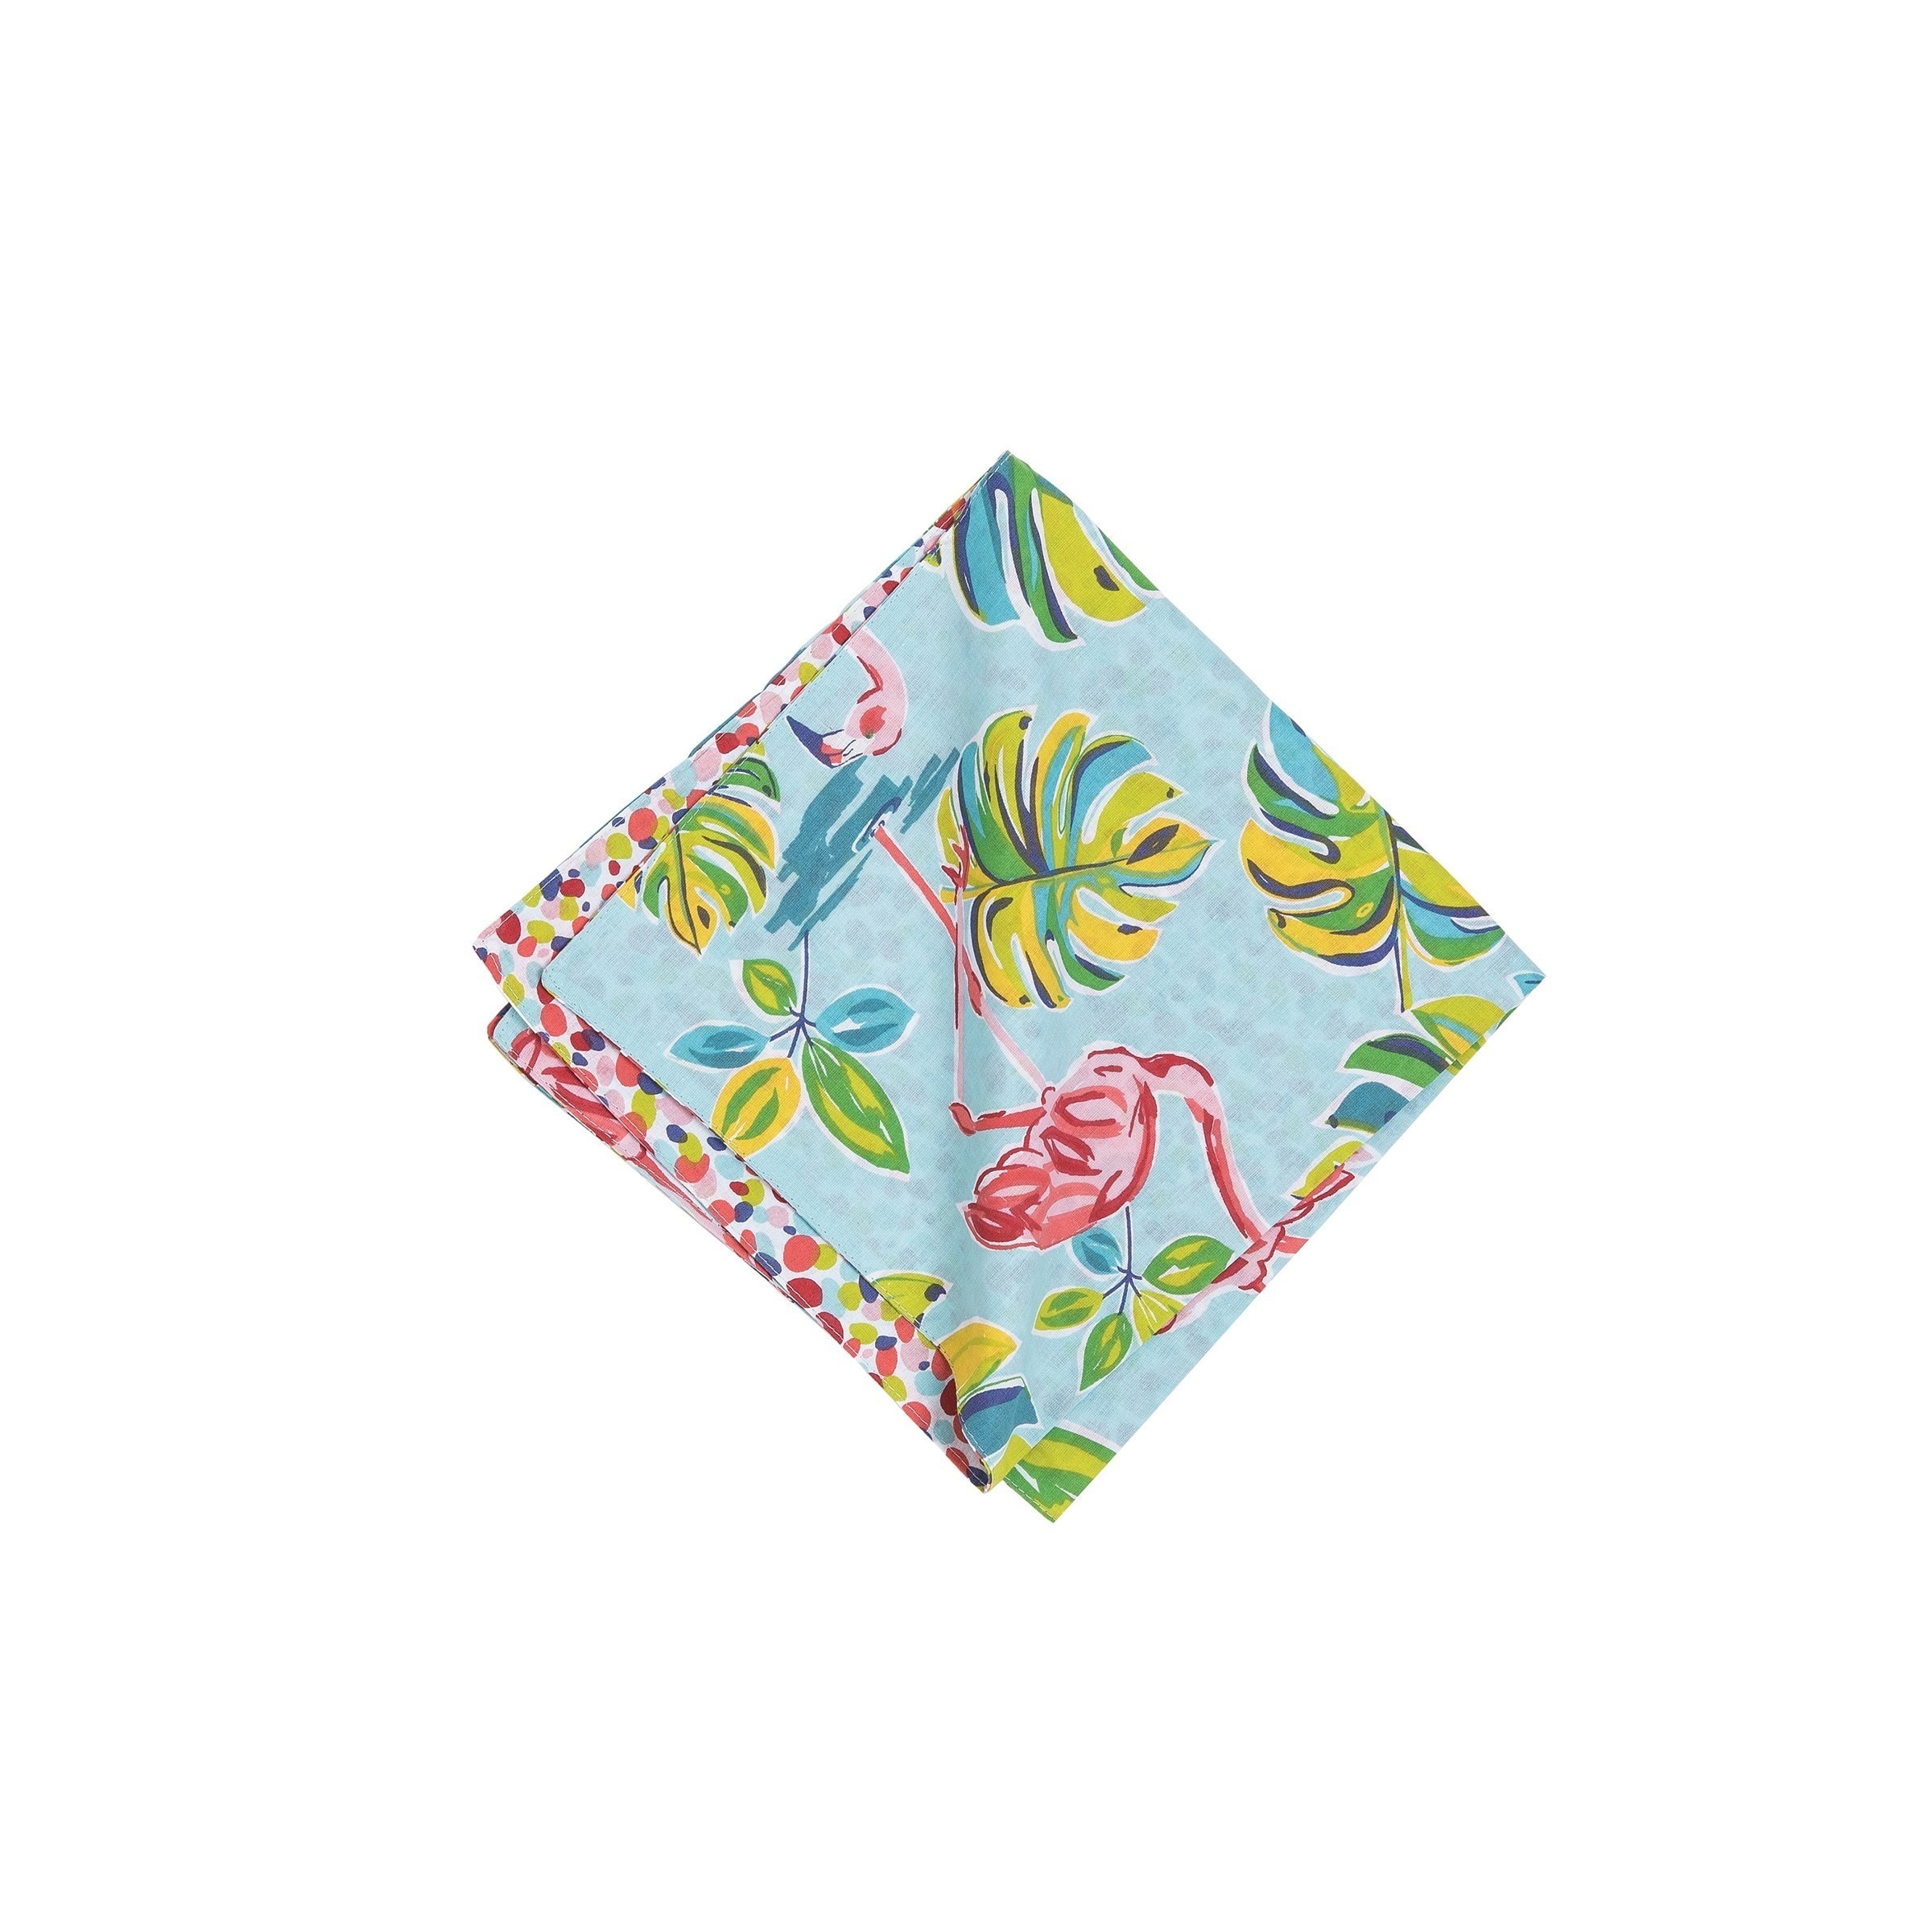 https://ak1.ostkcdn.com/images/products/is/images/direct/5940673ab9ee9eaa47ef8d980f97965a23e8a64a/Flamingo-Garden-Cotton-Reversible-Napkin-Set-of-6.jpg